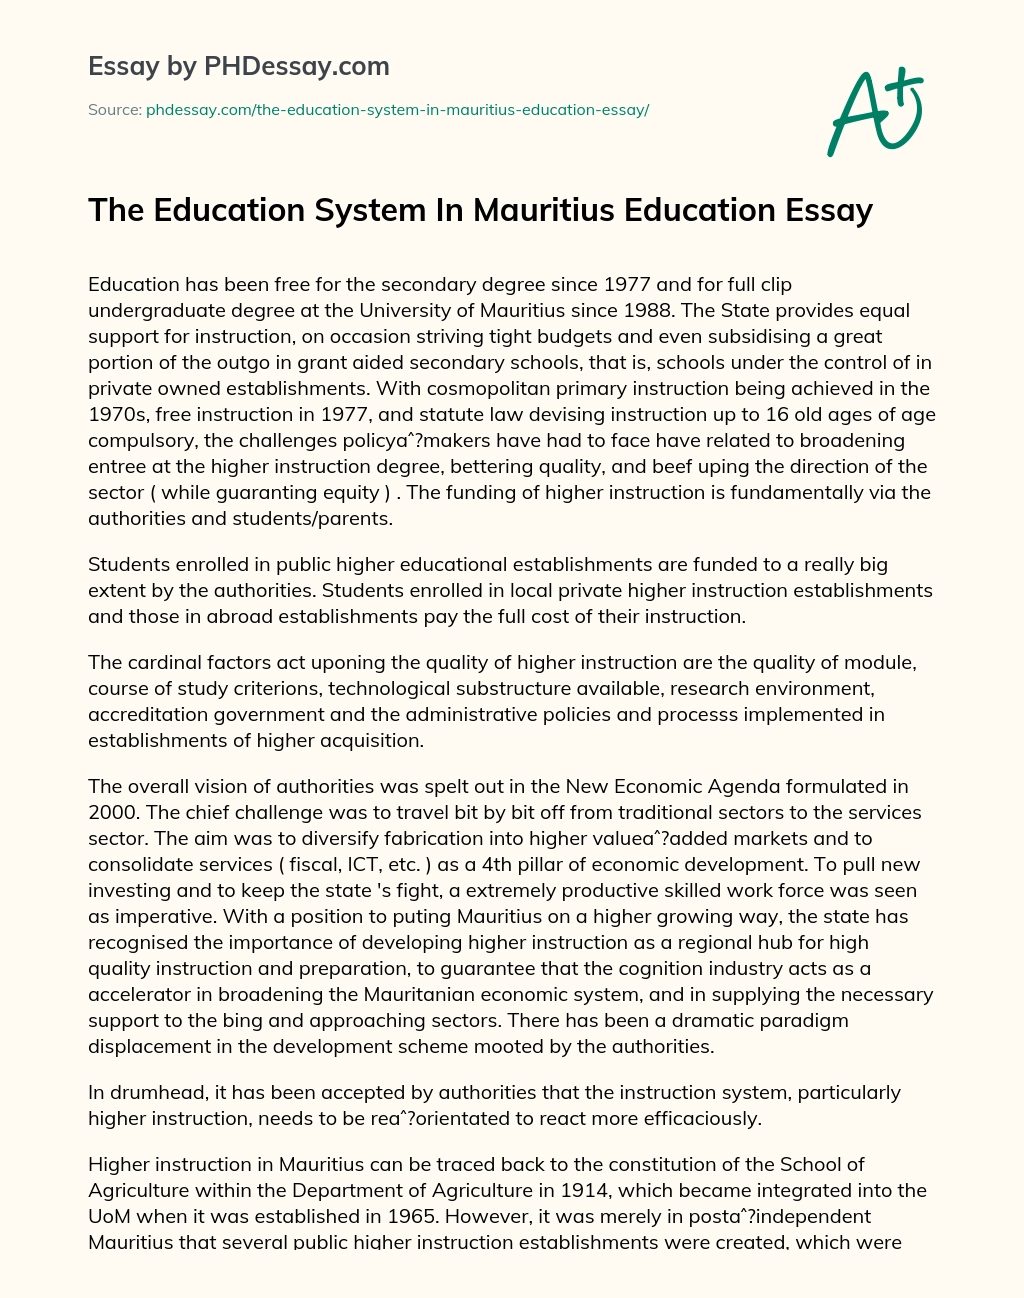 The Education System In Mauritius Education Essay essay